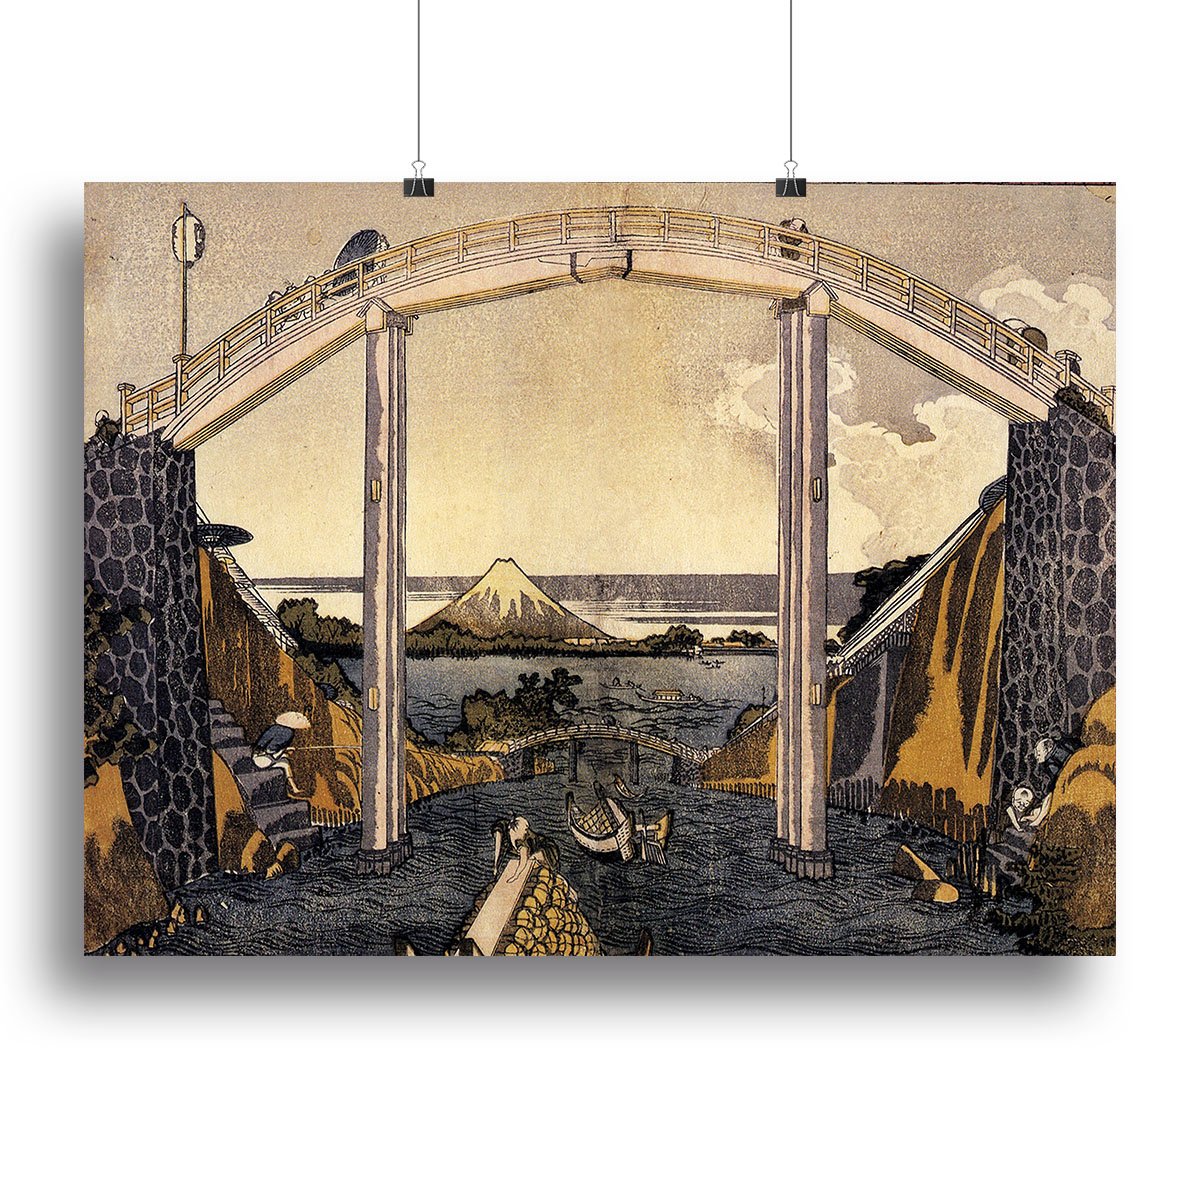 View of Mount Fuji by Hokusai Canvas Print or Poster